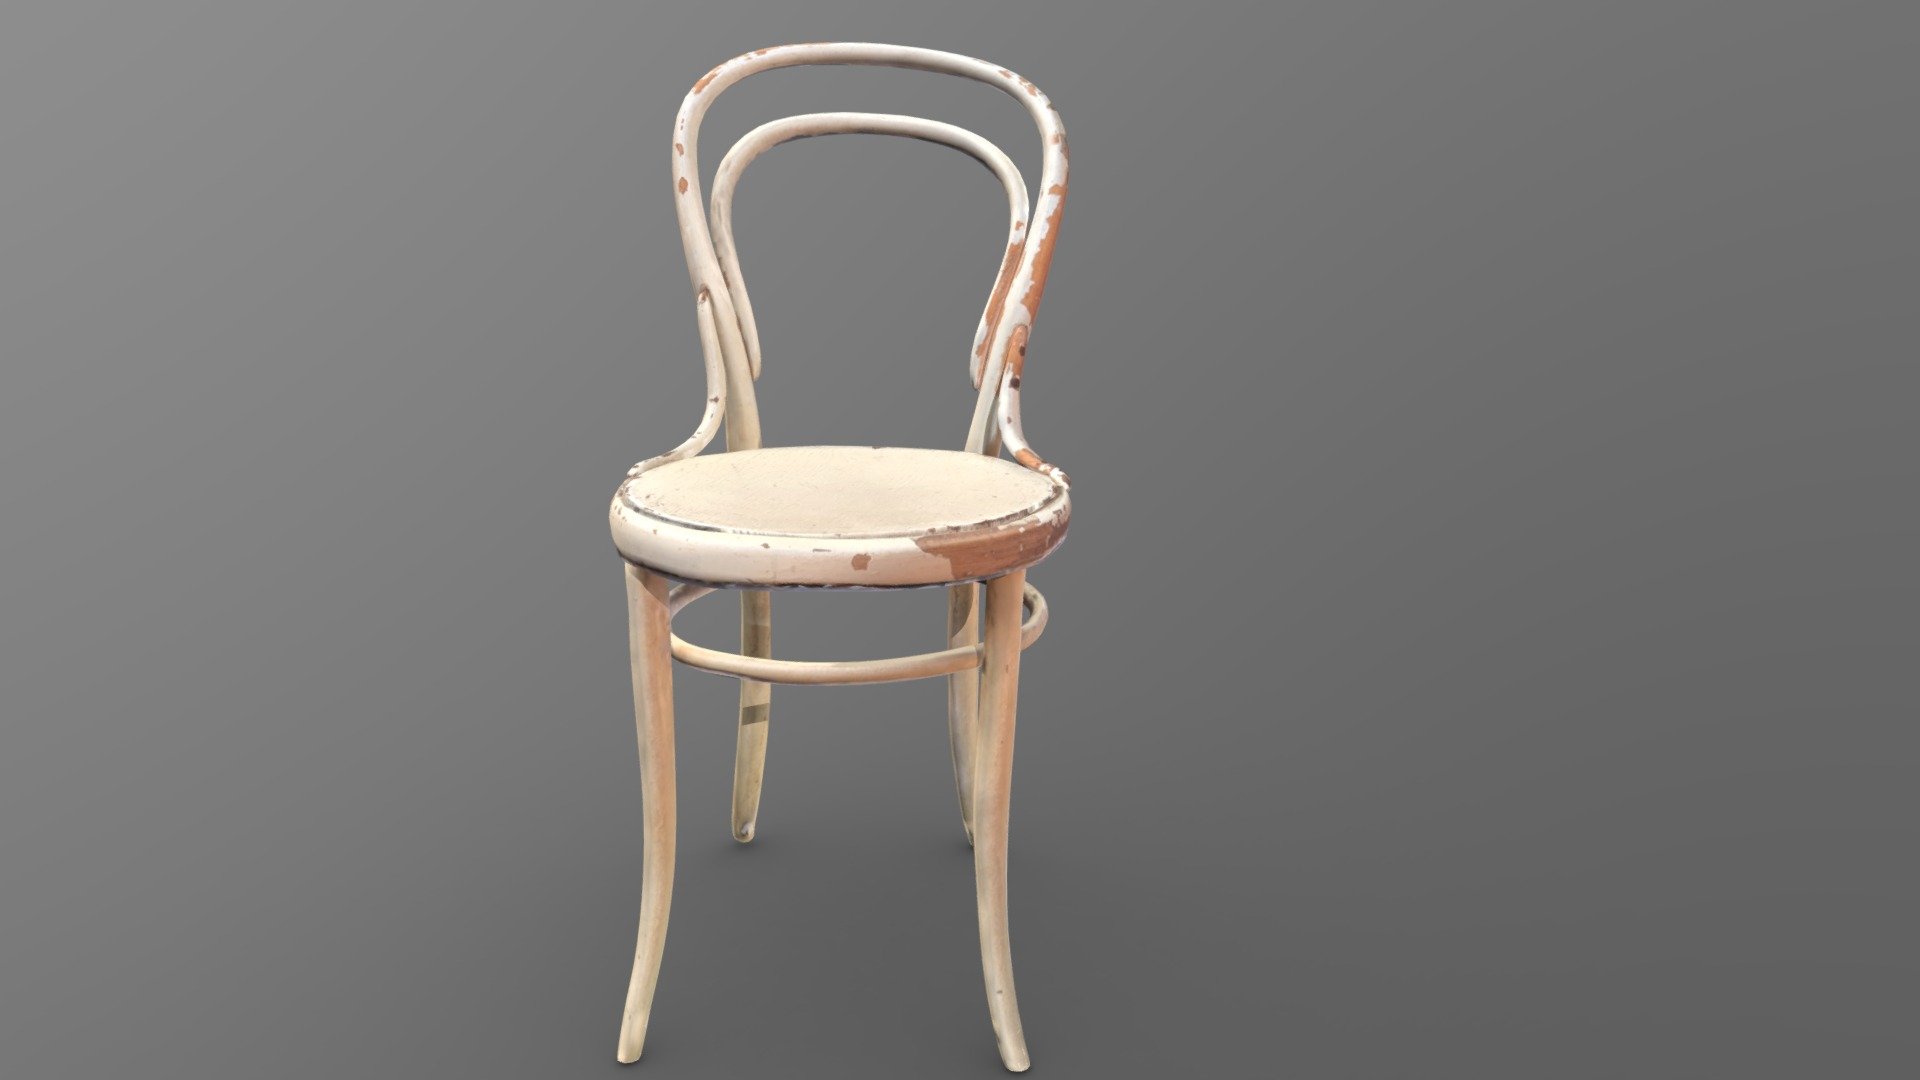 Lowres Model of a Thonet No.14 bentwood chair with white chipped paint. 
Old, used look, texture of a Reality Capture scan.
Diffuse, Roughness and Normal Map - Thonet Nr.14 Chair - 3D model by fuchs&bär (@fuchsundbaer) 3d model